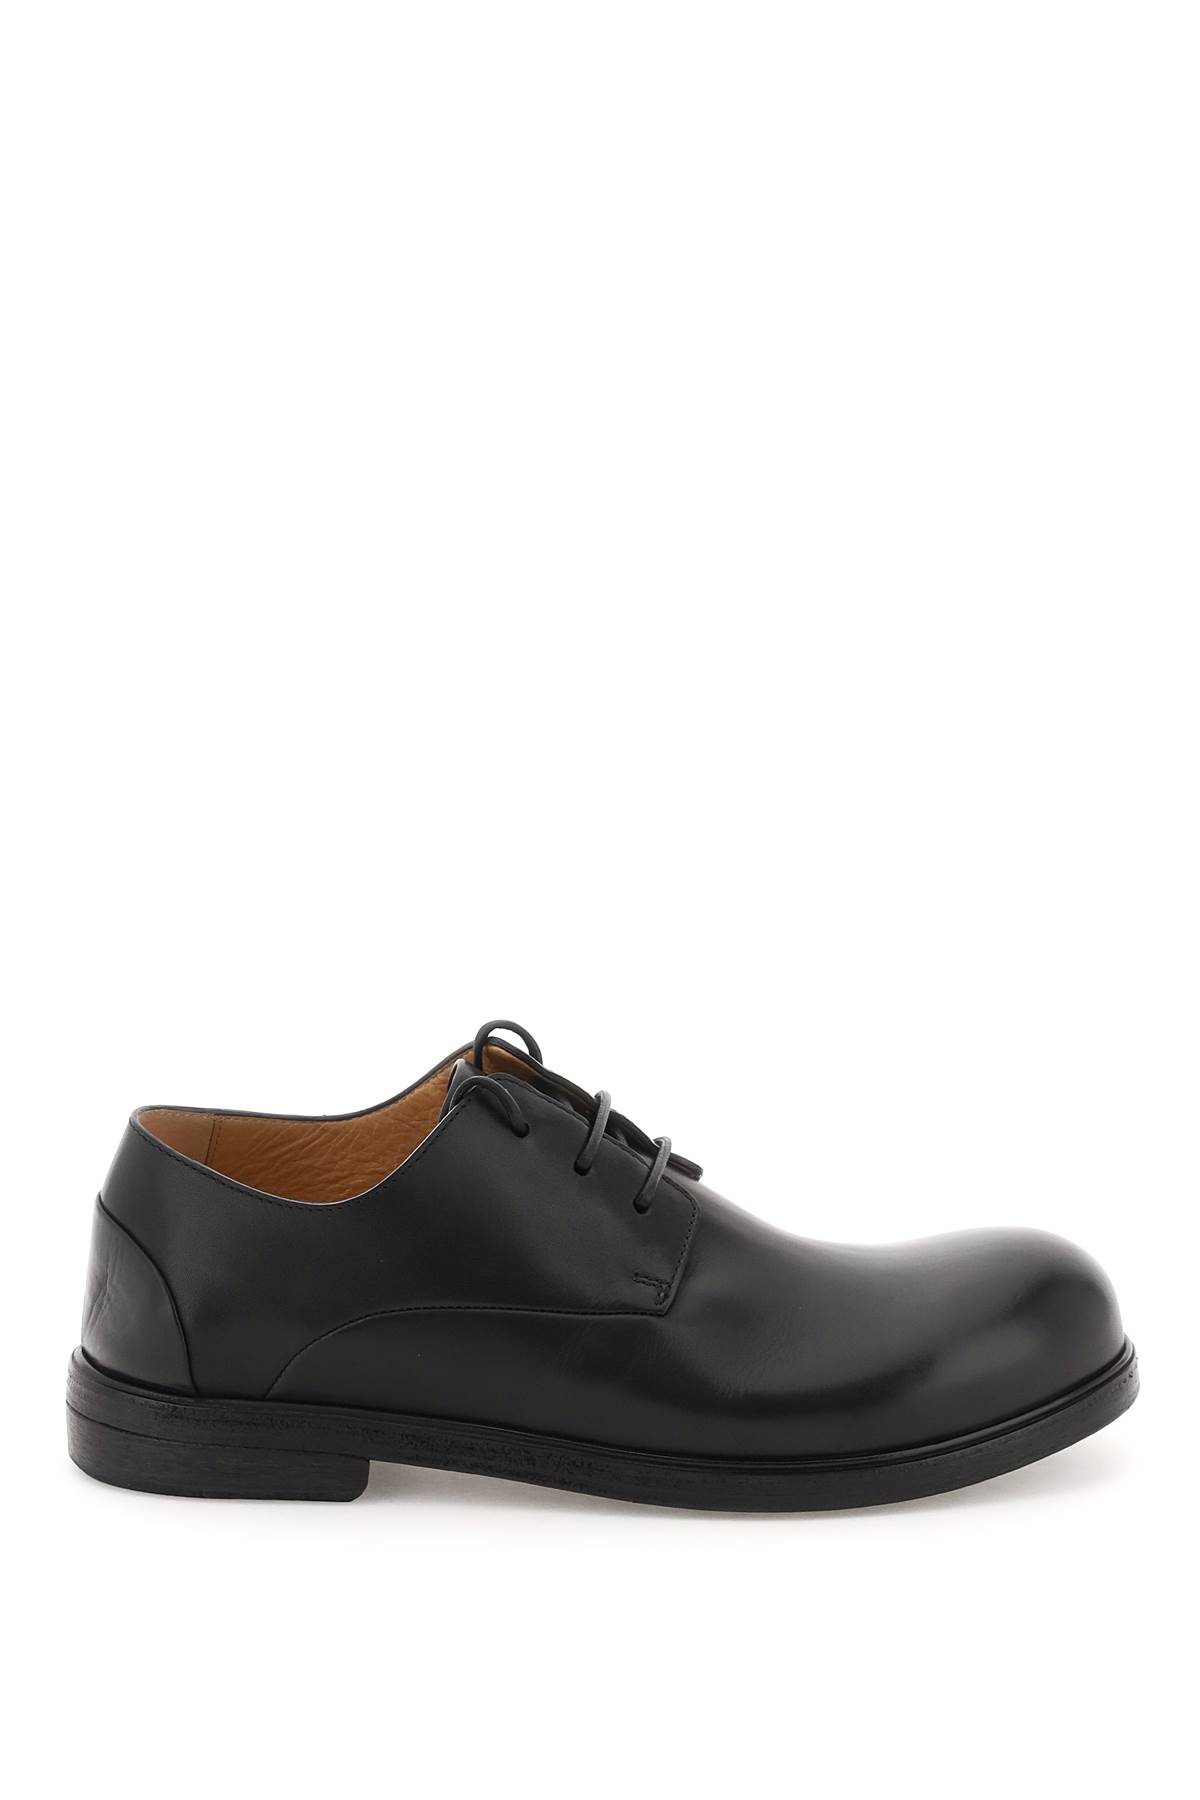 Marsell zucca Media Leather Derby Shoes